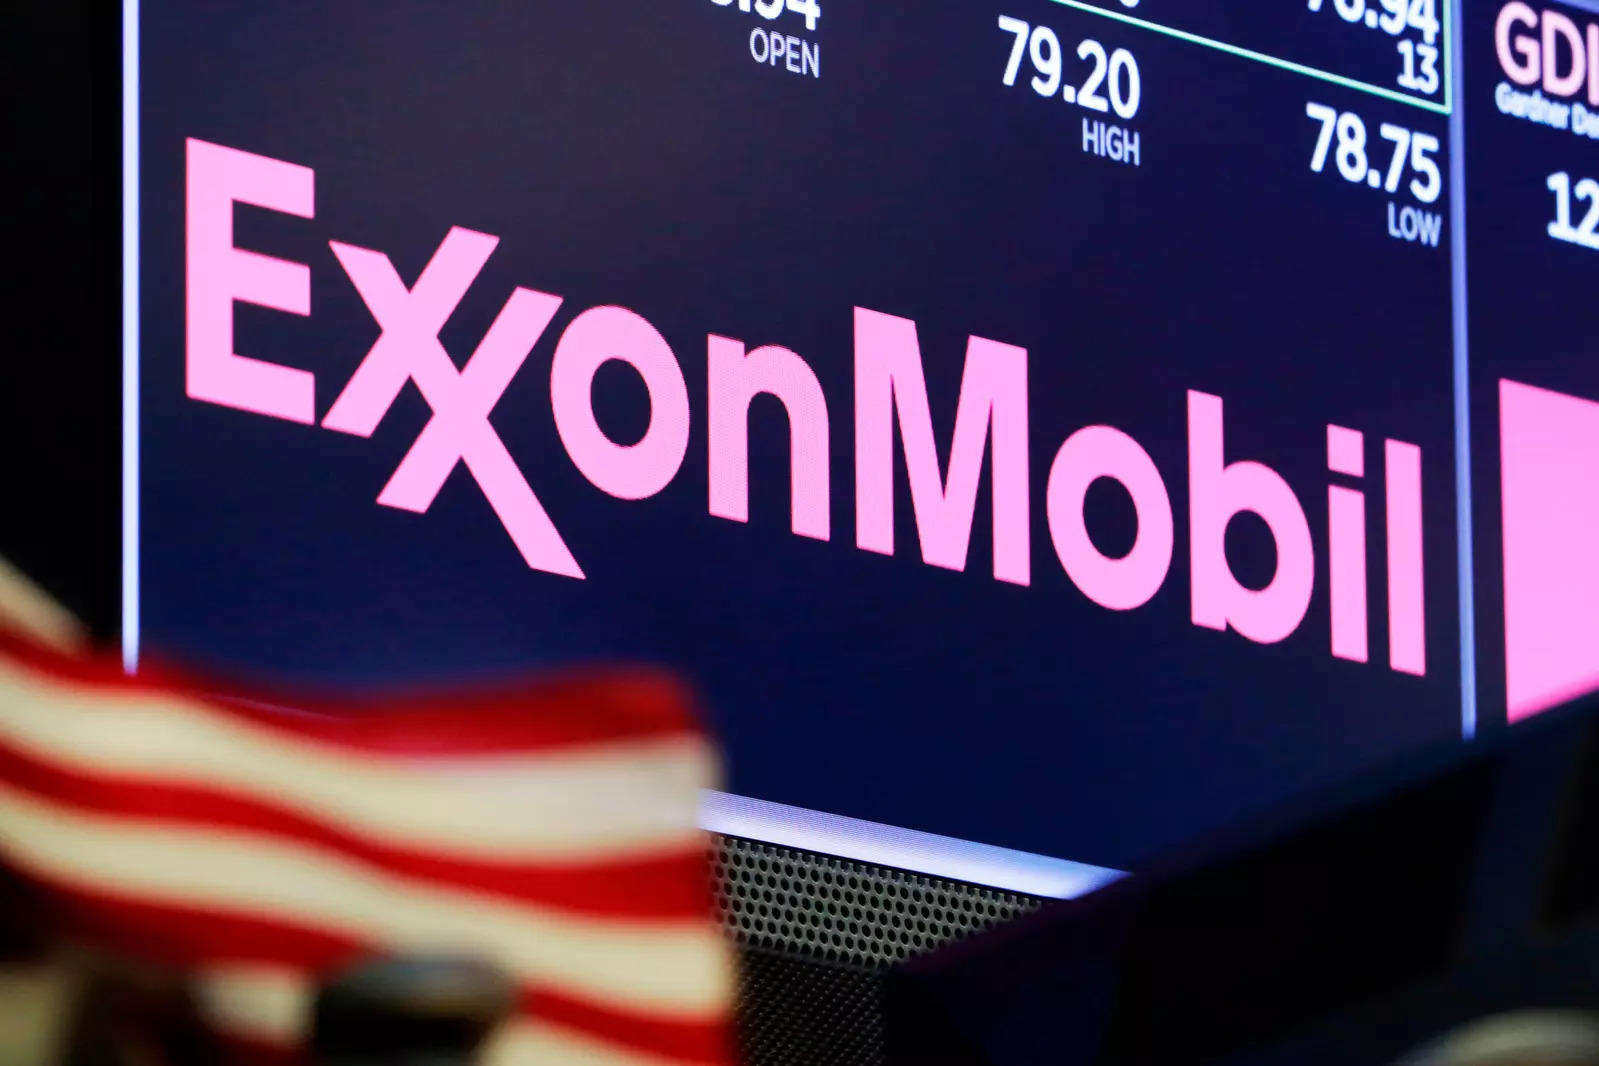 Exxon Mobil's total reserves drop by a third after COVID-19 oil price drop